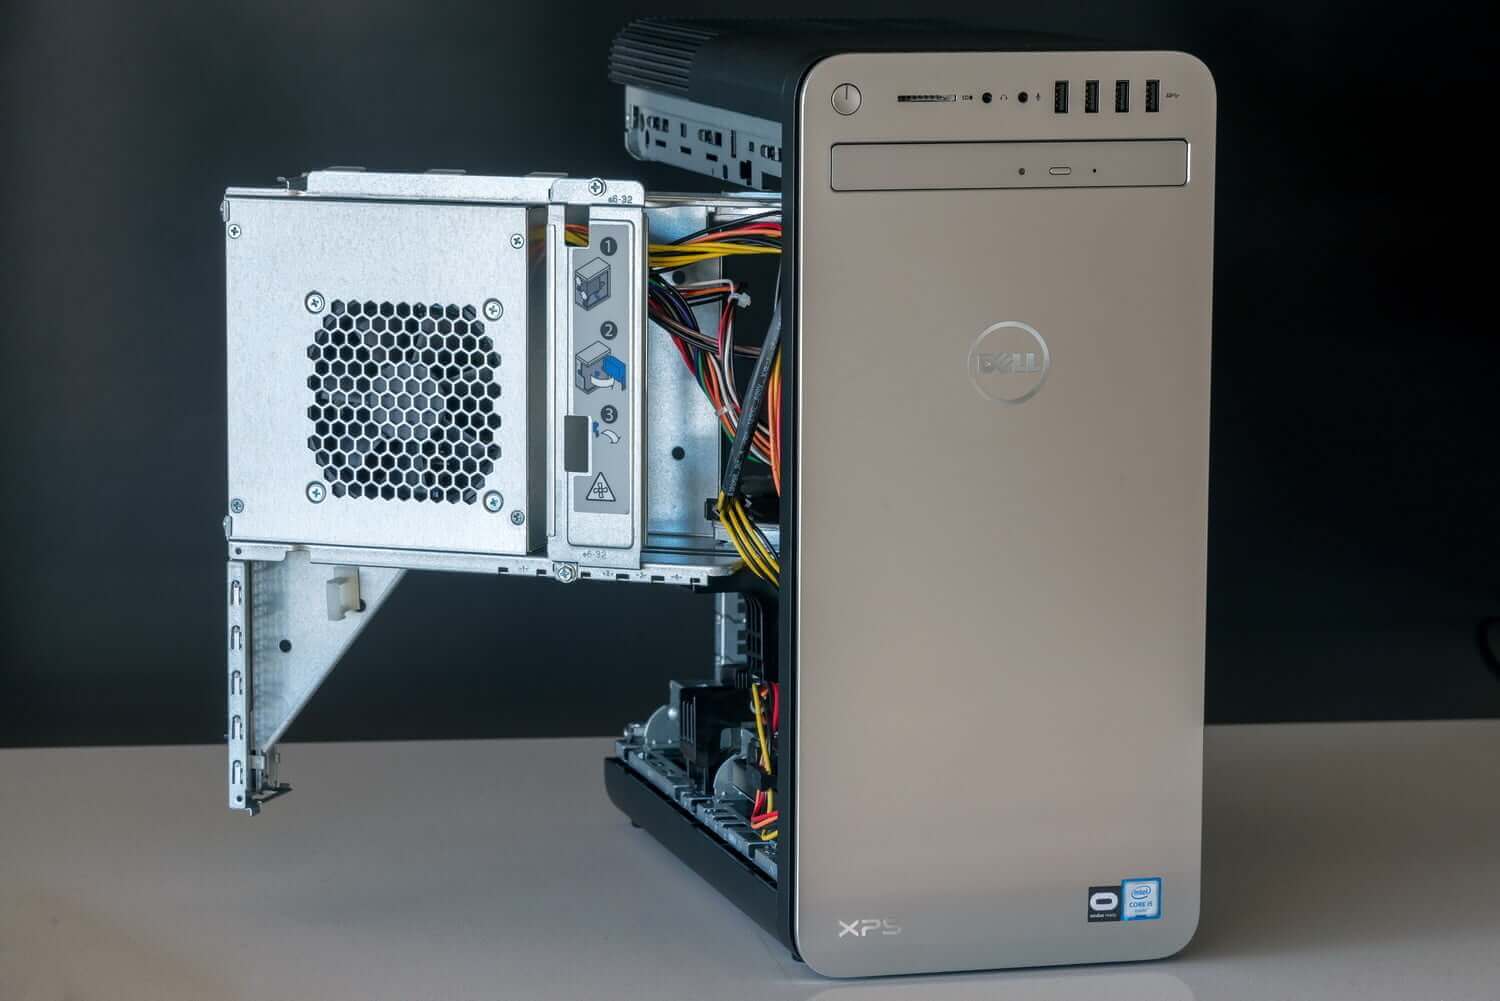 dell xps tower special edition Bottom Line